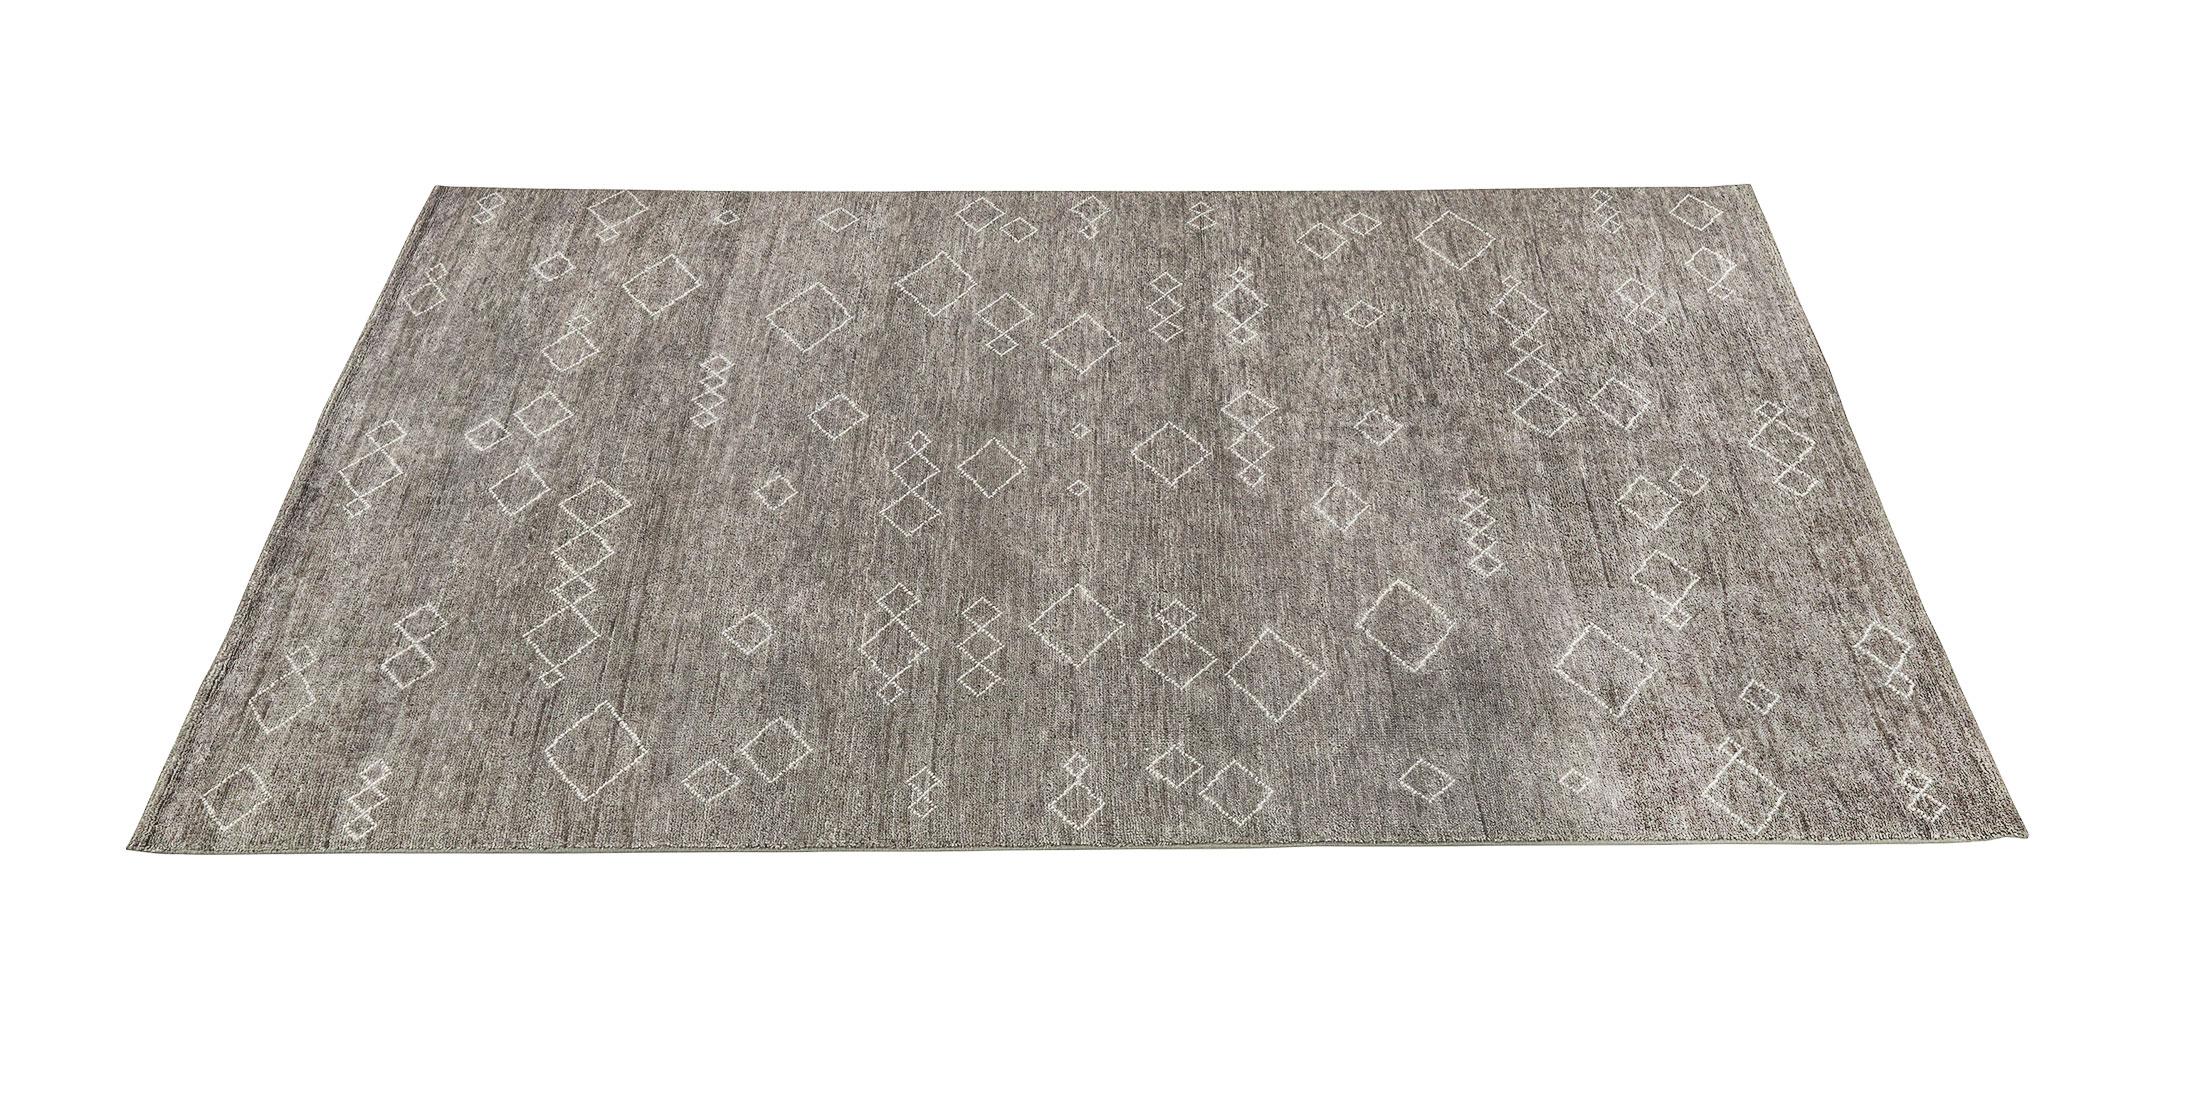 For Sale: Gray (Graphite/Sand) Ben Soleimani Arisa Rug– Moroccan Hand-knotted Plush Wool Carbon/Mist 12'x15' 2